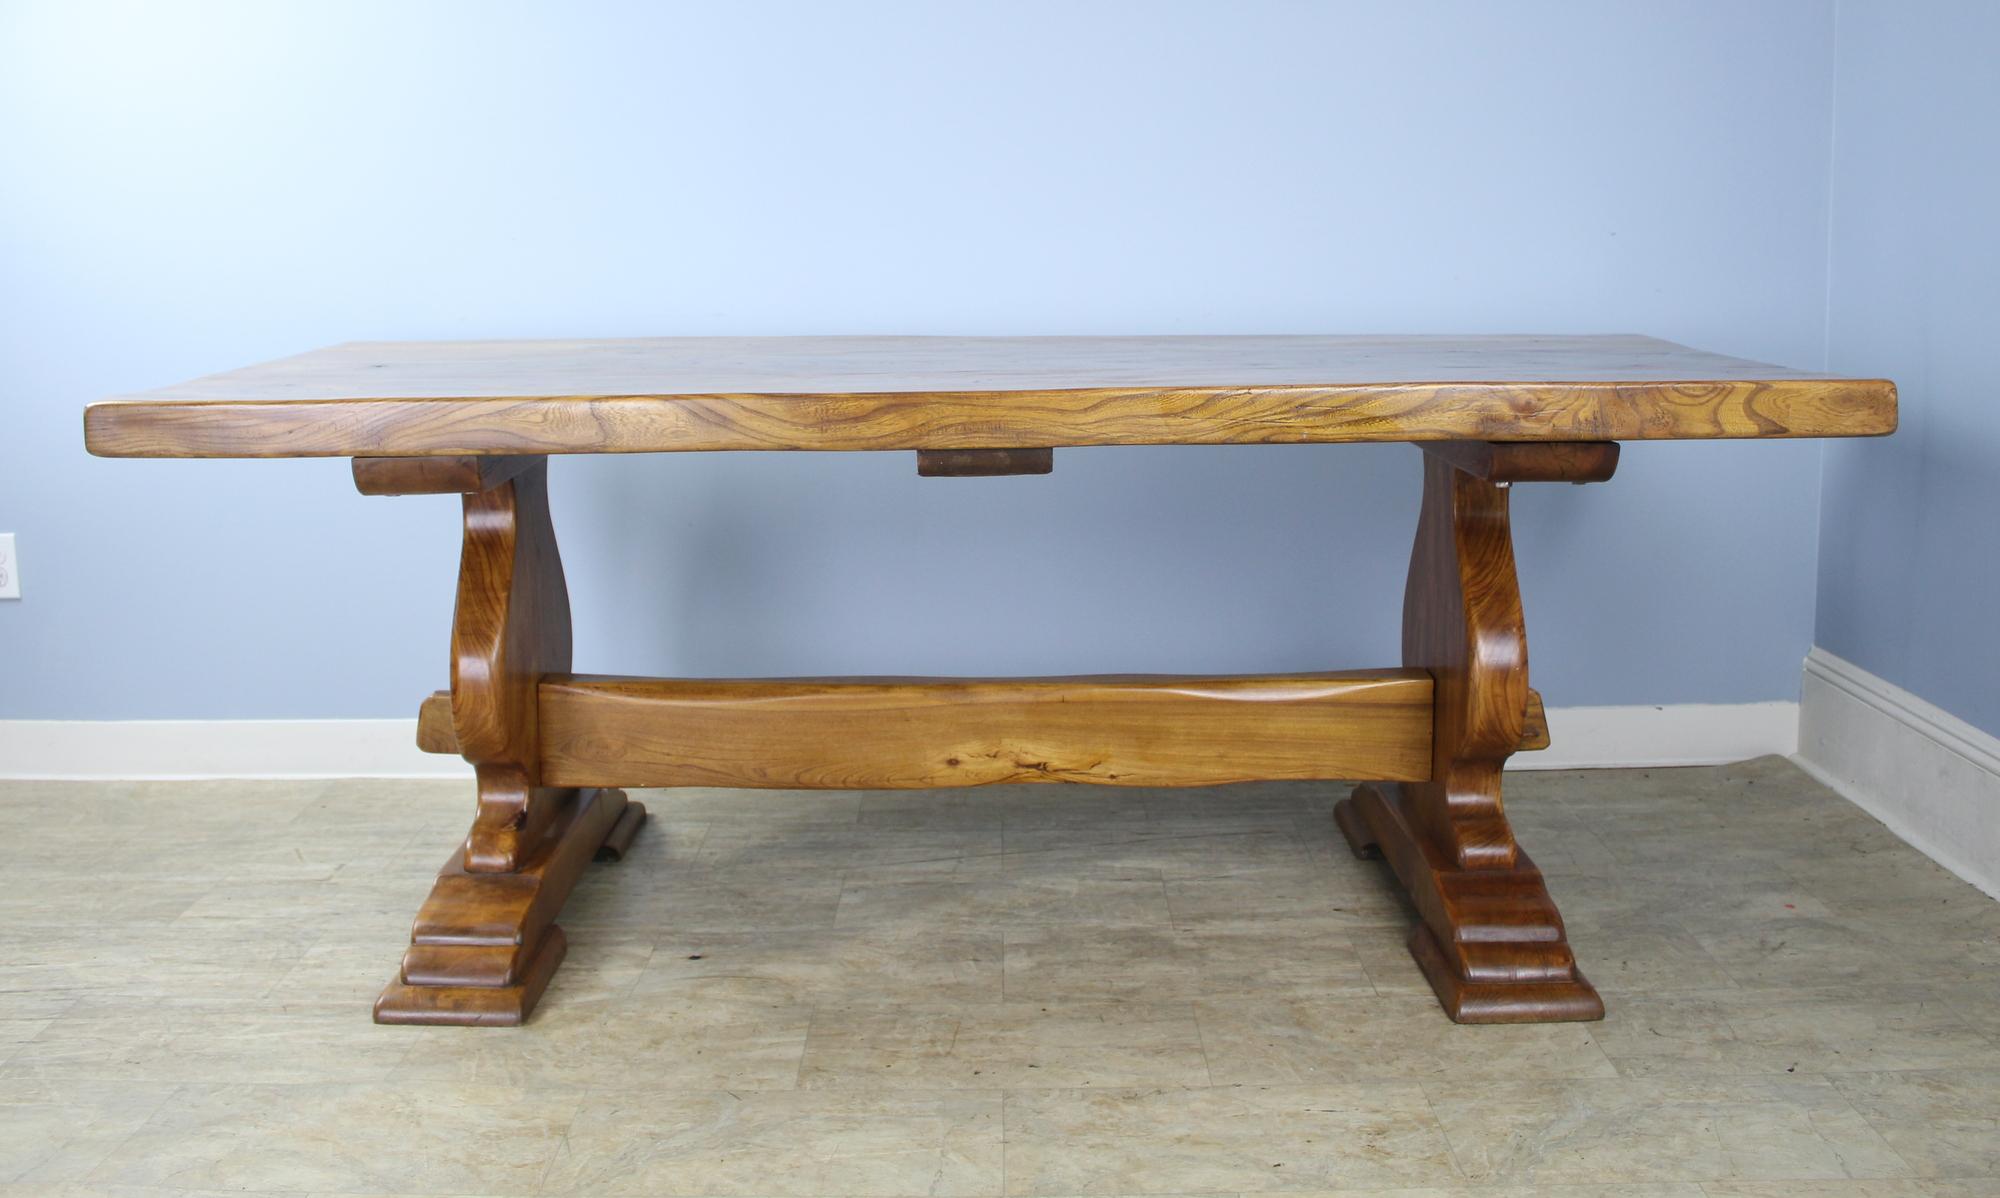 A handsome and beautifully crafted antique French elm refectory table with a 2.5 inch thick top and marvelous construction and design on the trestle base. With no apron to get in the way, this table can comfortably accommodate eight. Great color,